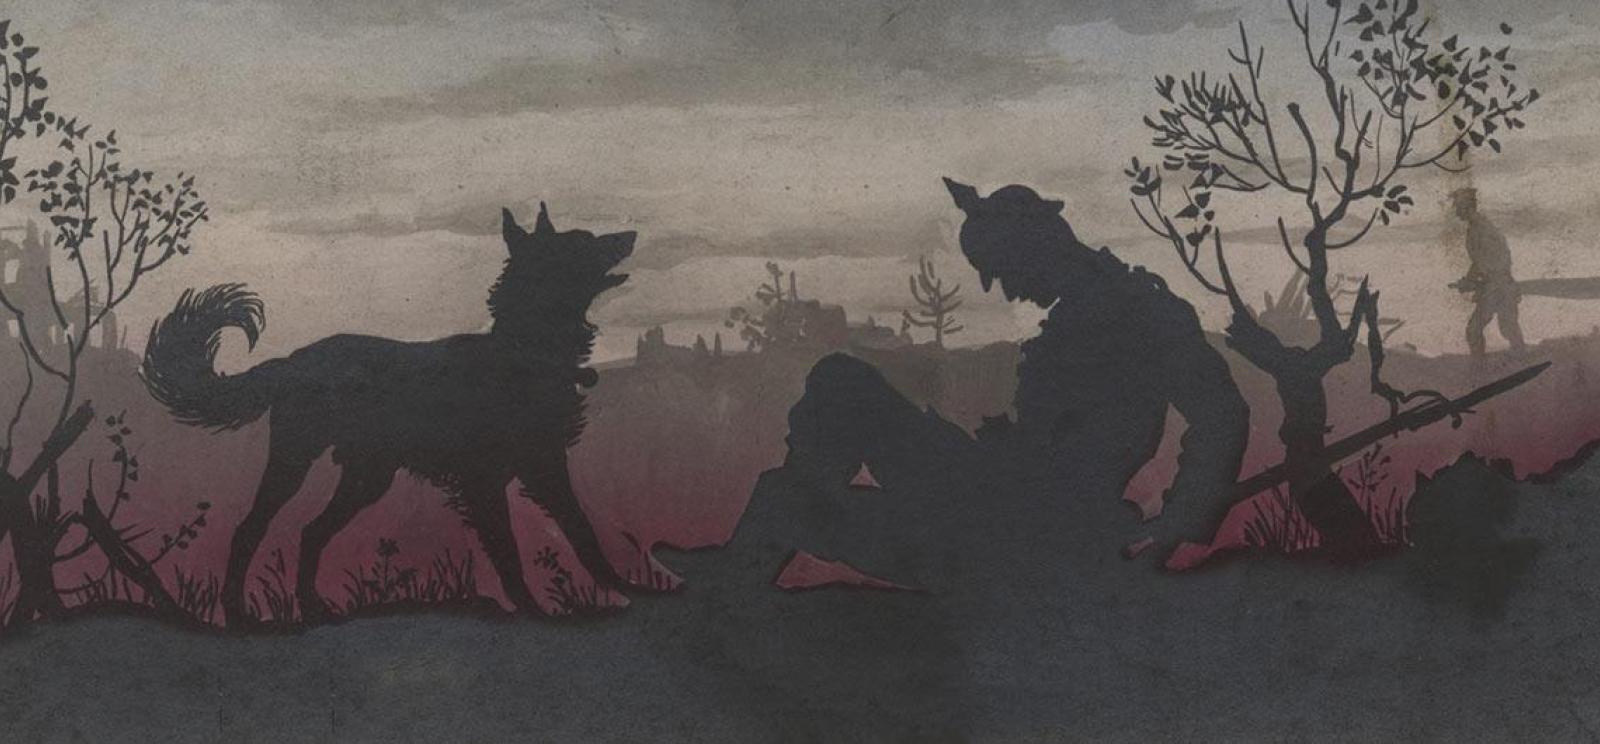 Stylized painting of the silhouettes of a soldier sitting down on a battlefield and a dog in front of him.